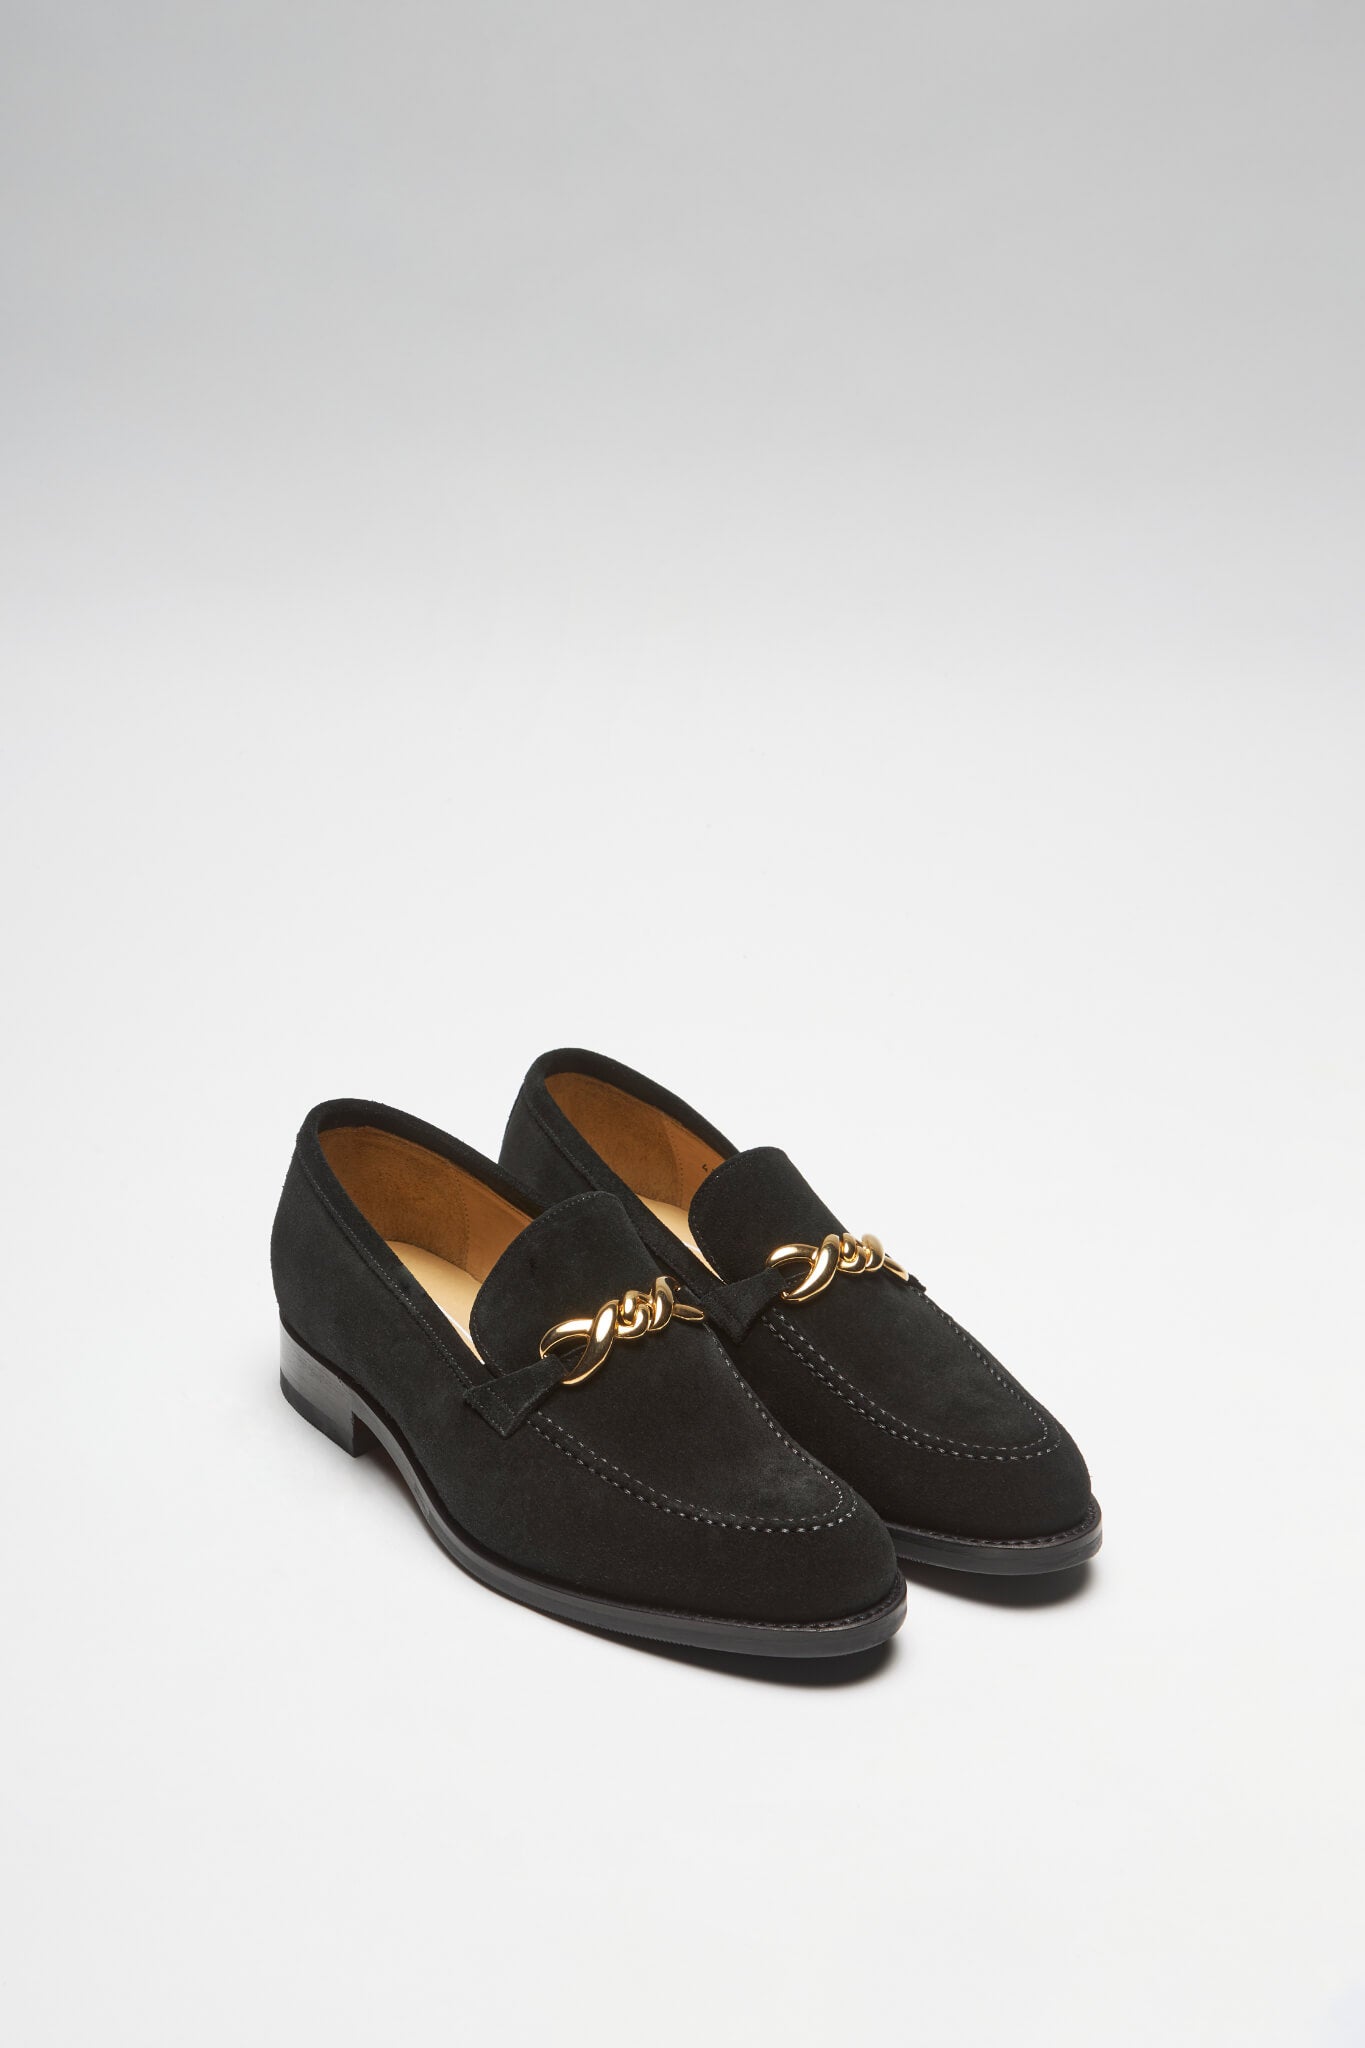 CHLOES Suede Negro